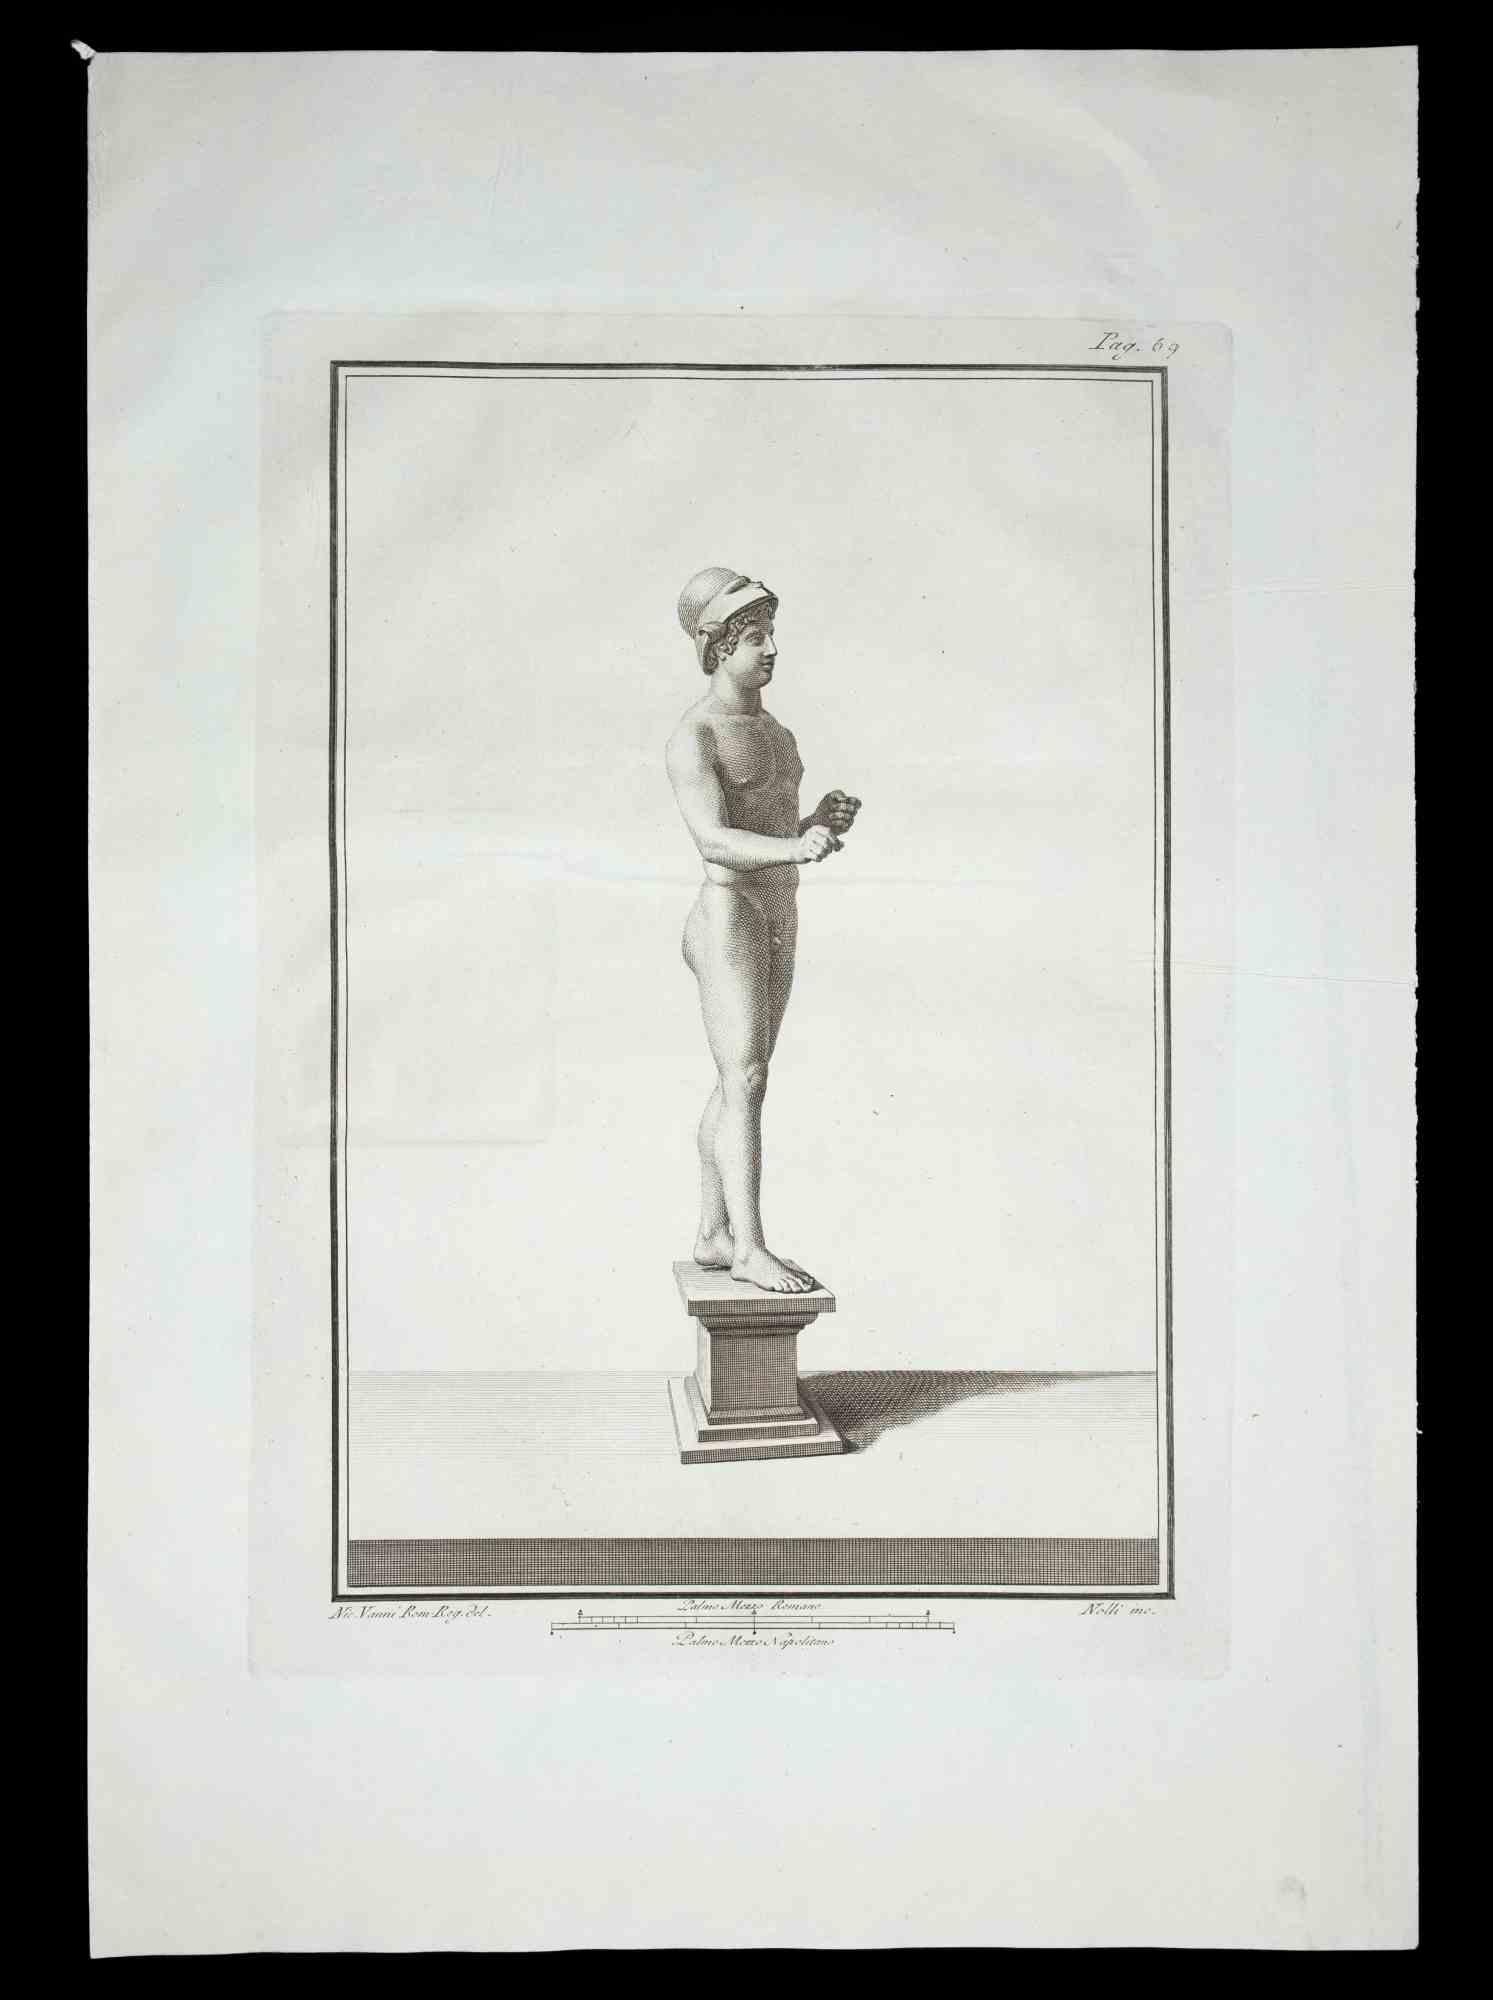 Ancient Roman statue, from the series "Antiquities of Herculaneum", is an original etching on paper realized by Carlo  Nolli in the 18th century.

Signed on the plate, on the lower right.

Good conditions with slight foxing.

The etching belongs to